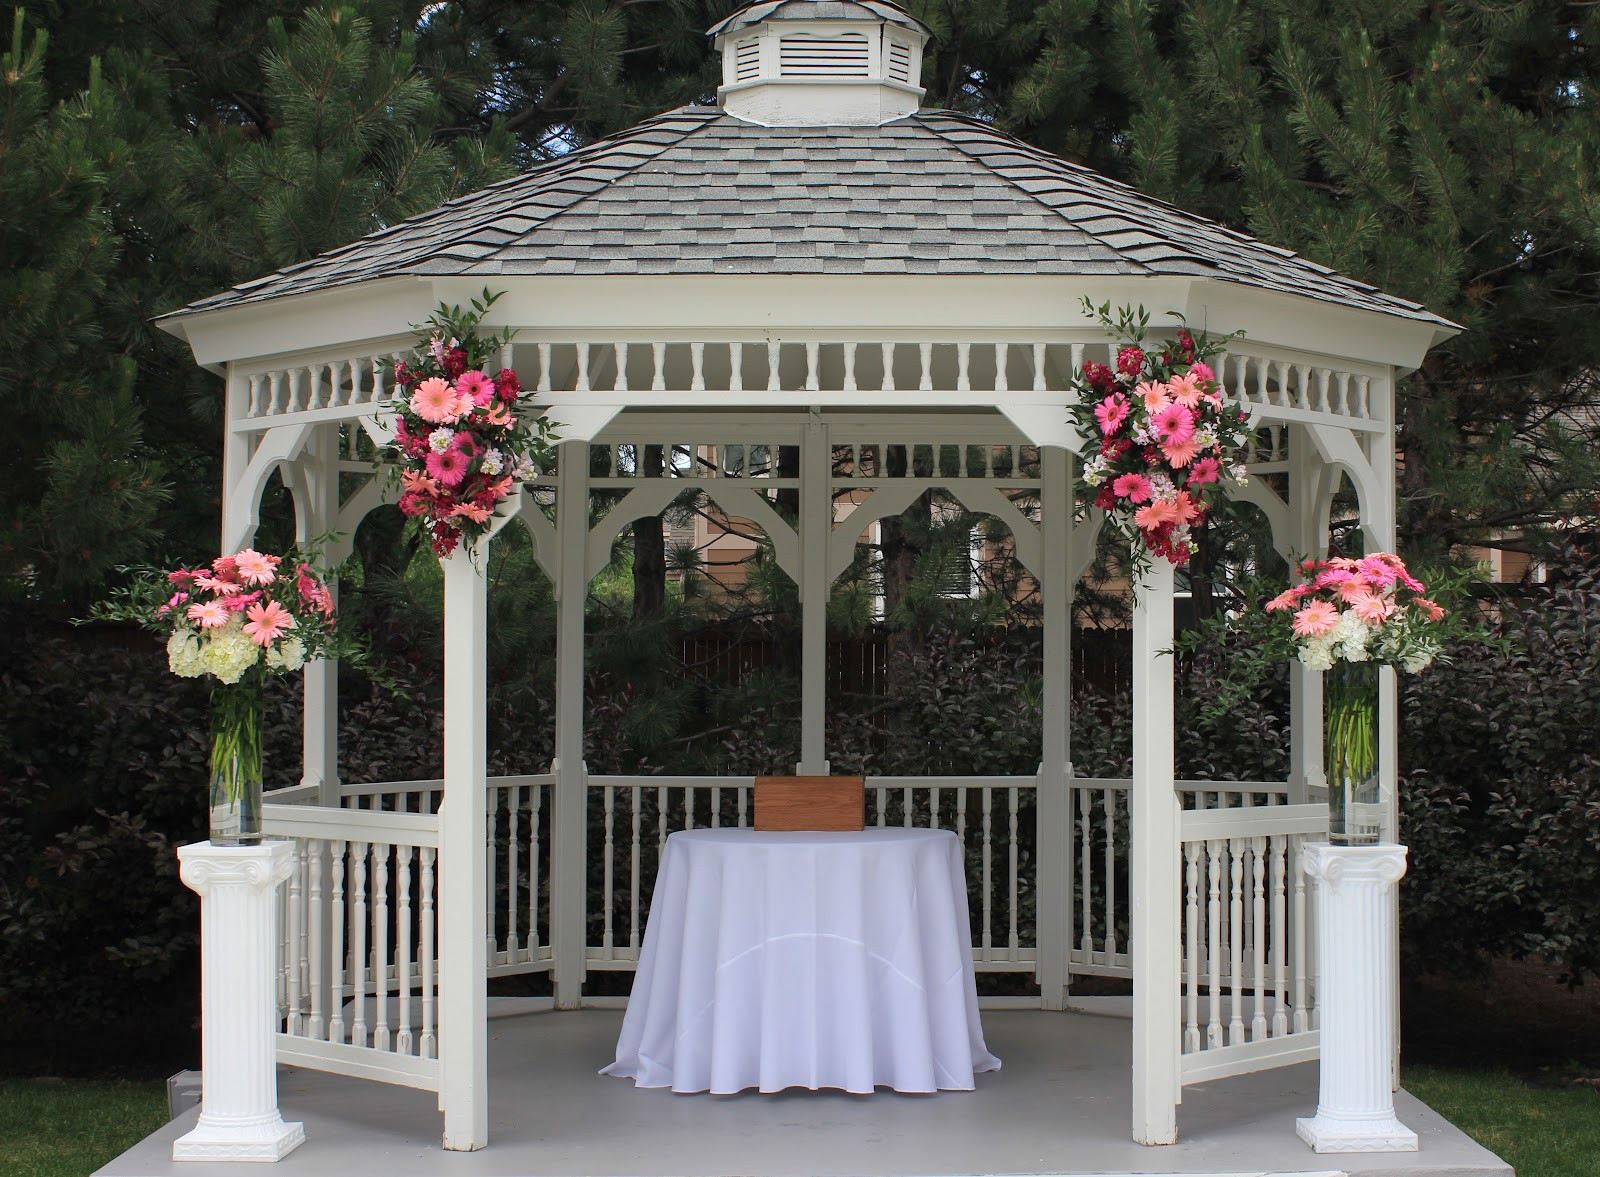 How To Decorate A Gazebo For A Wedding
 The Brilliant Blog Pink Chic